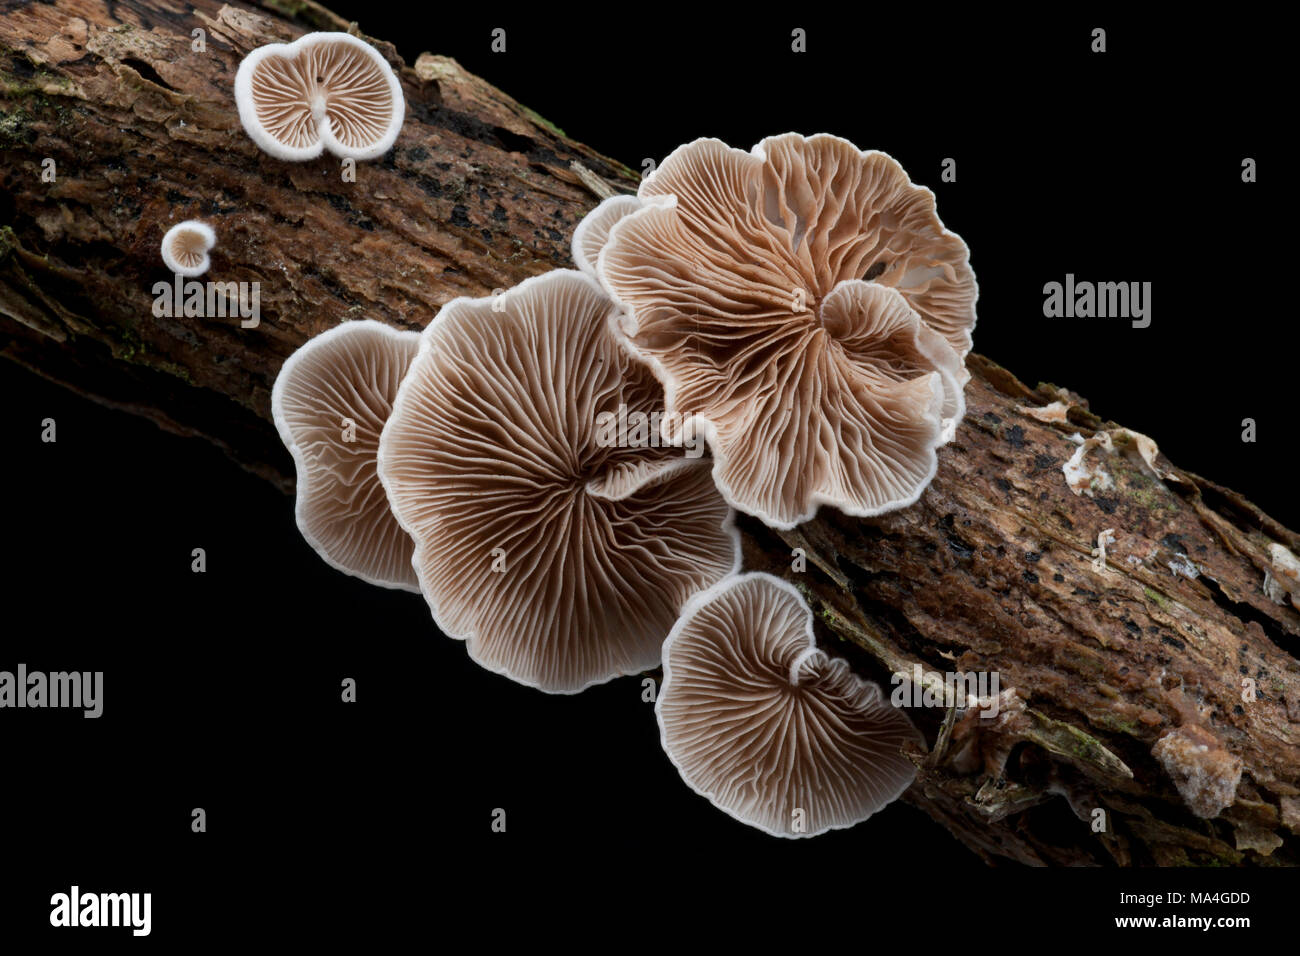 A specimen of Crepidotus cesatii fungi, found growing on dead twigs in the New Forest Hampshire England  UK GB Stock Photo